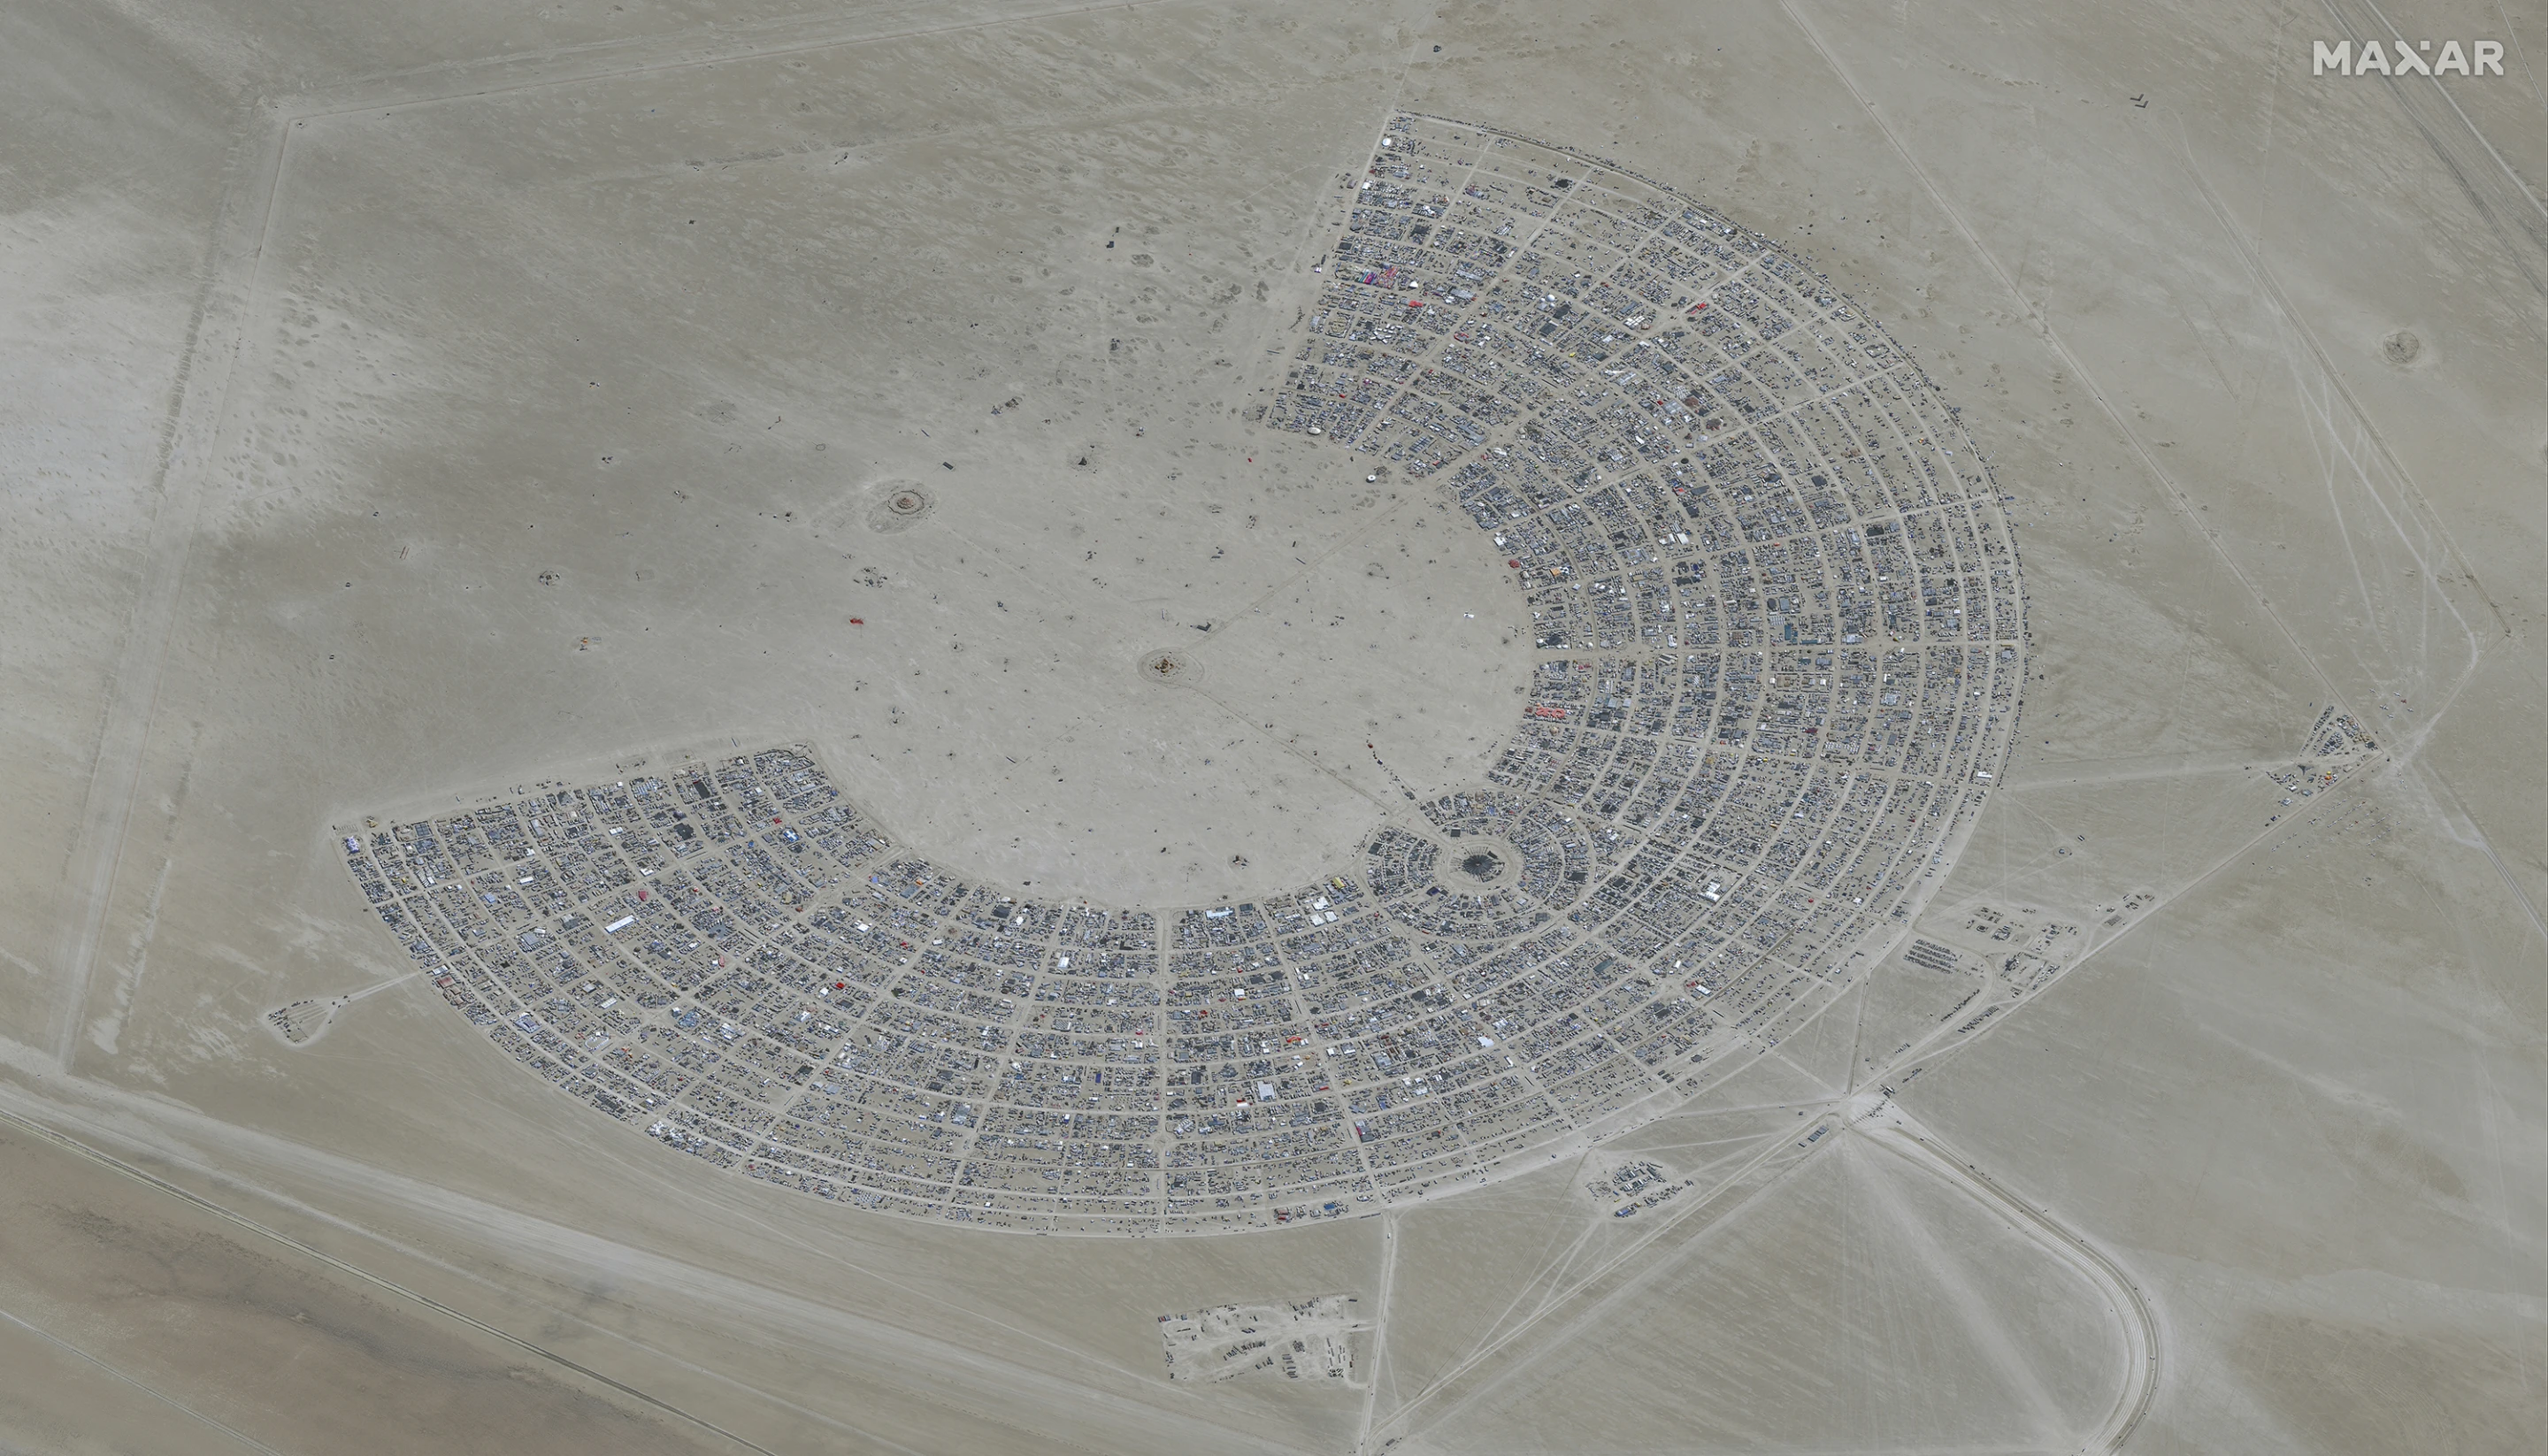 Satellite view of the Burning Man festival in Black Rock, Nevada on Monday, 28 August 2023. Photo: Maxar Technologies / AP